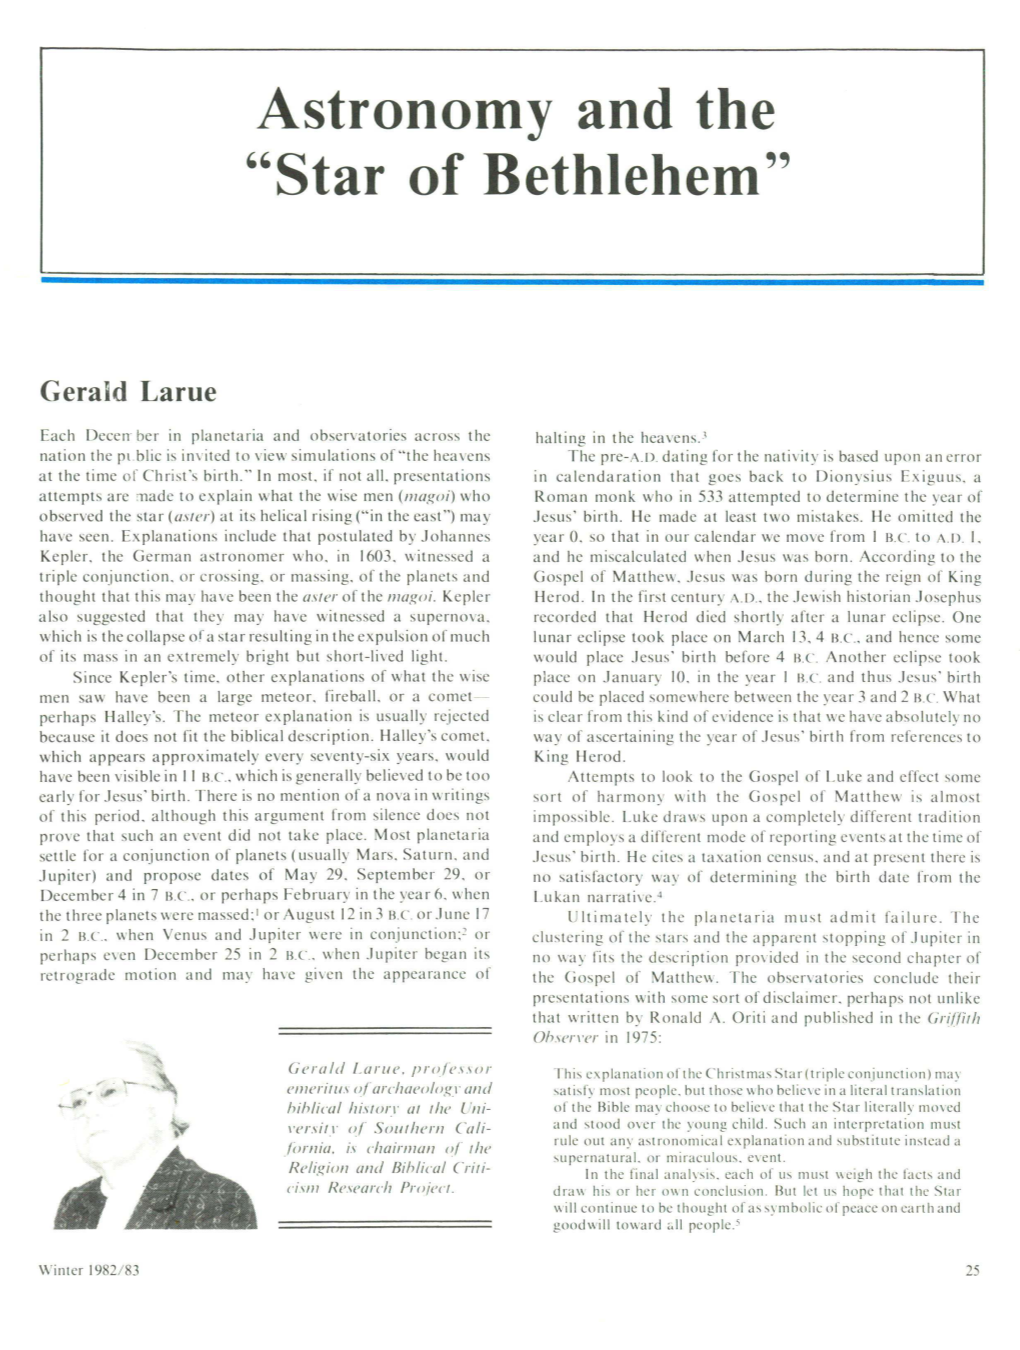 Astronomy and the "Star of Bethlehem"